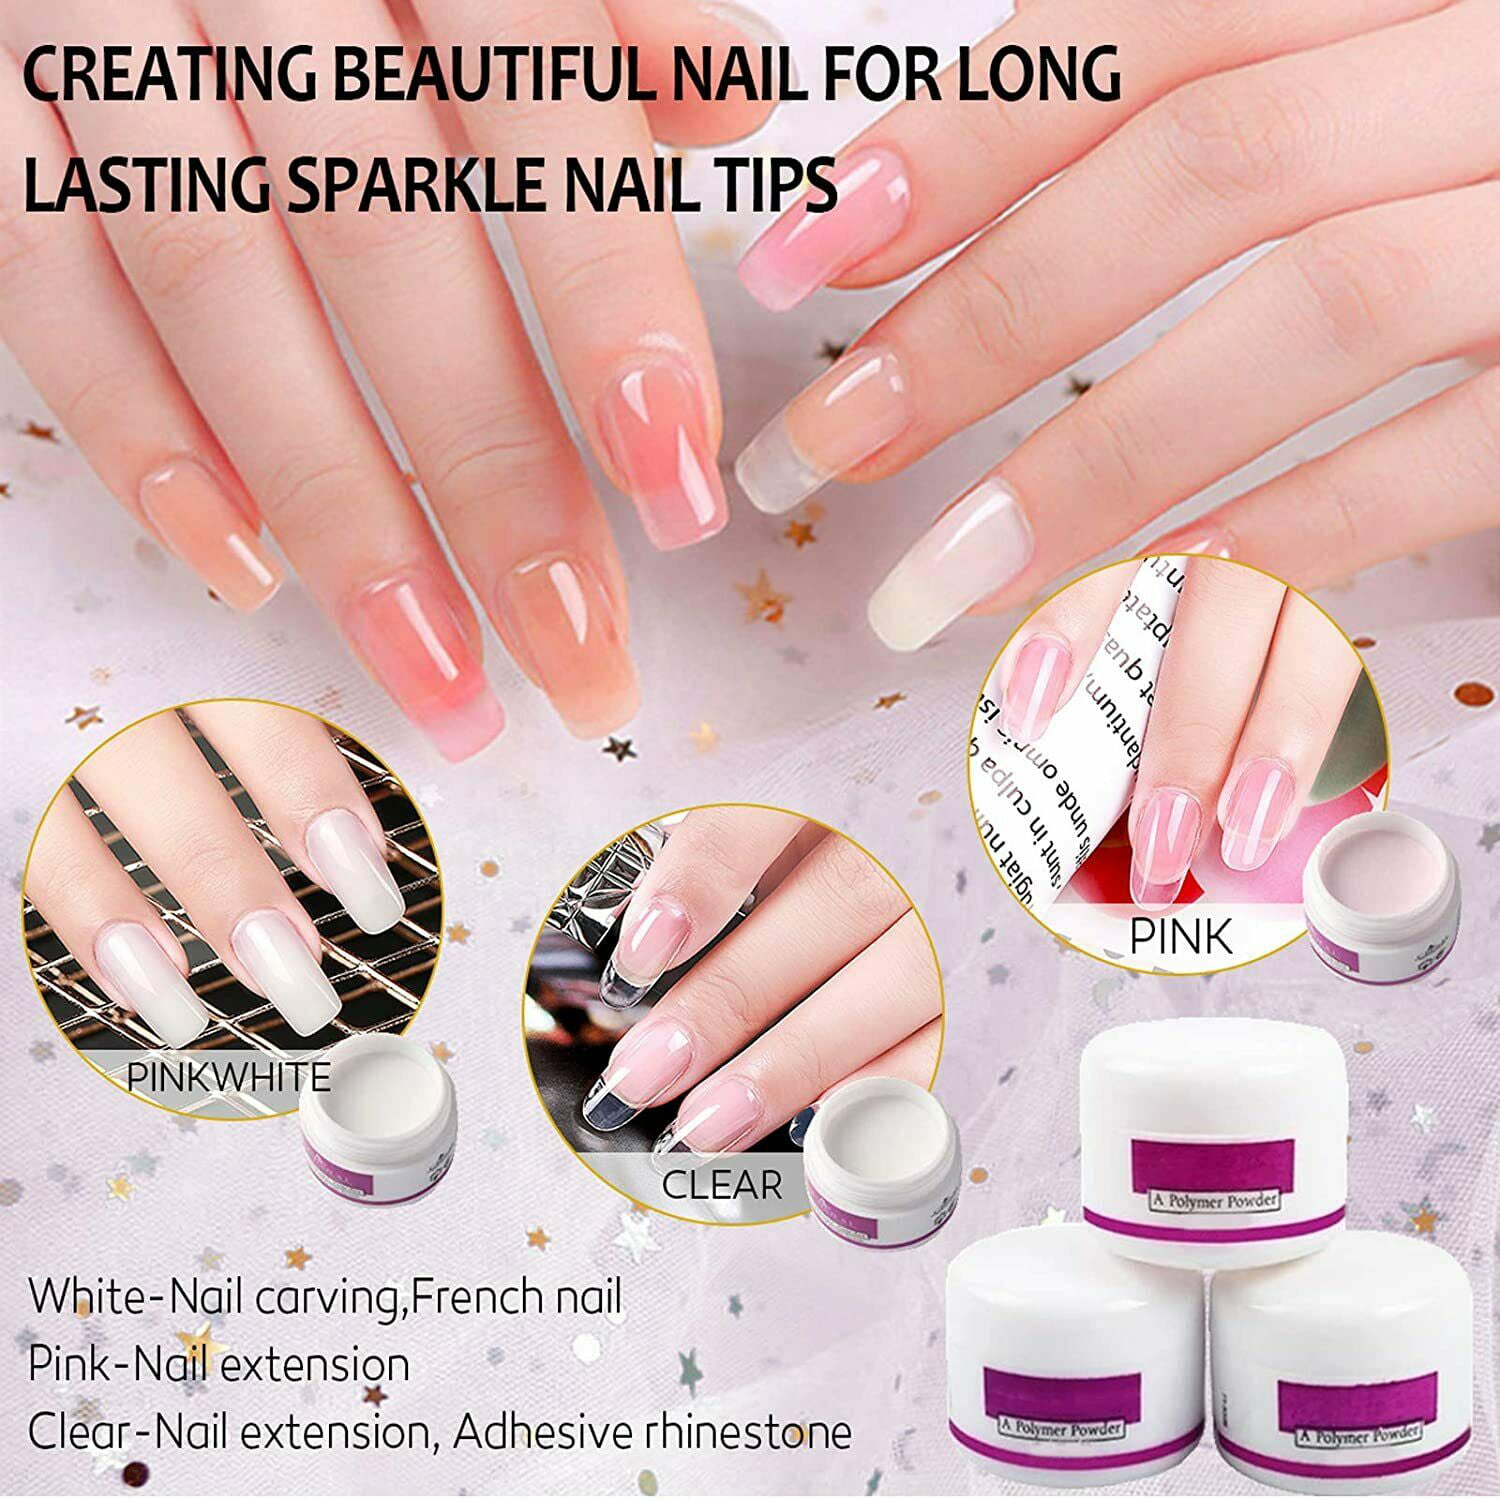 Instantly Upgrade Your Look with 24pcs Long Almond White French Glitter  Powder Fake Nail & 1sheet Tape & 1pc Nail File | SHEIN